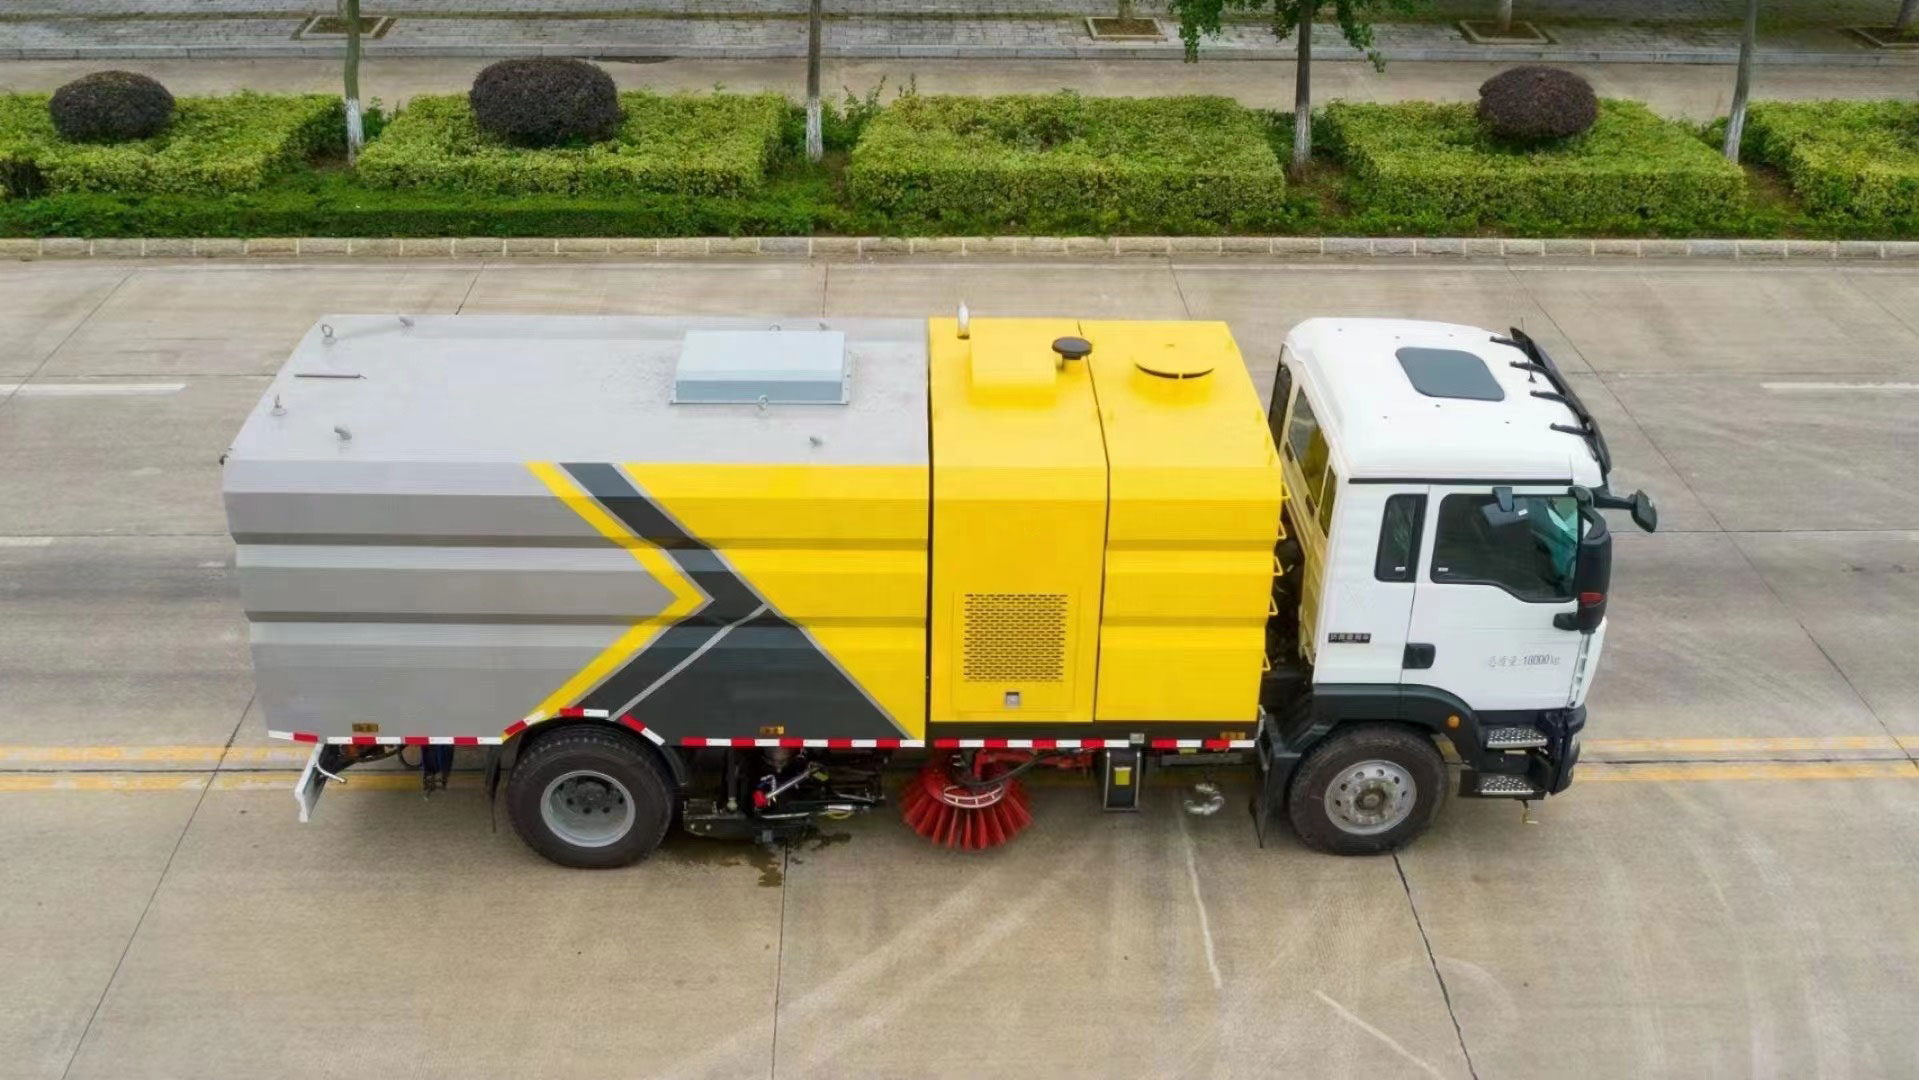 Suction Systems Multi-scene Use of Sweeper Truck for Cleaning